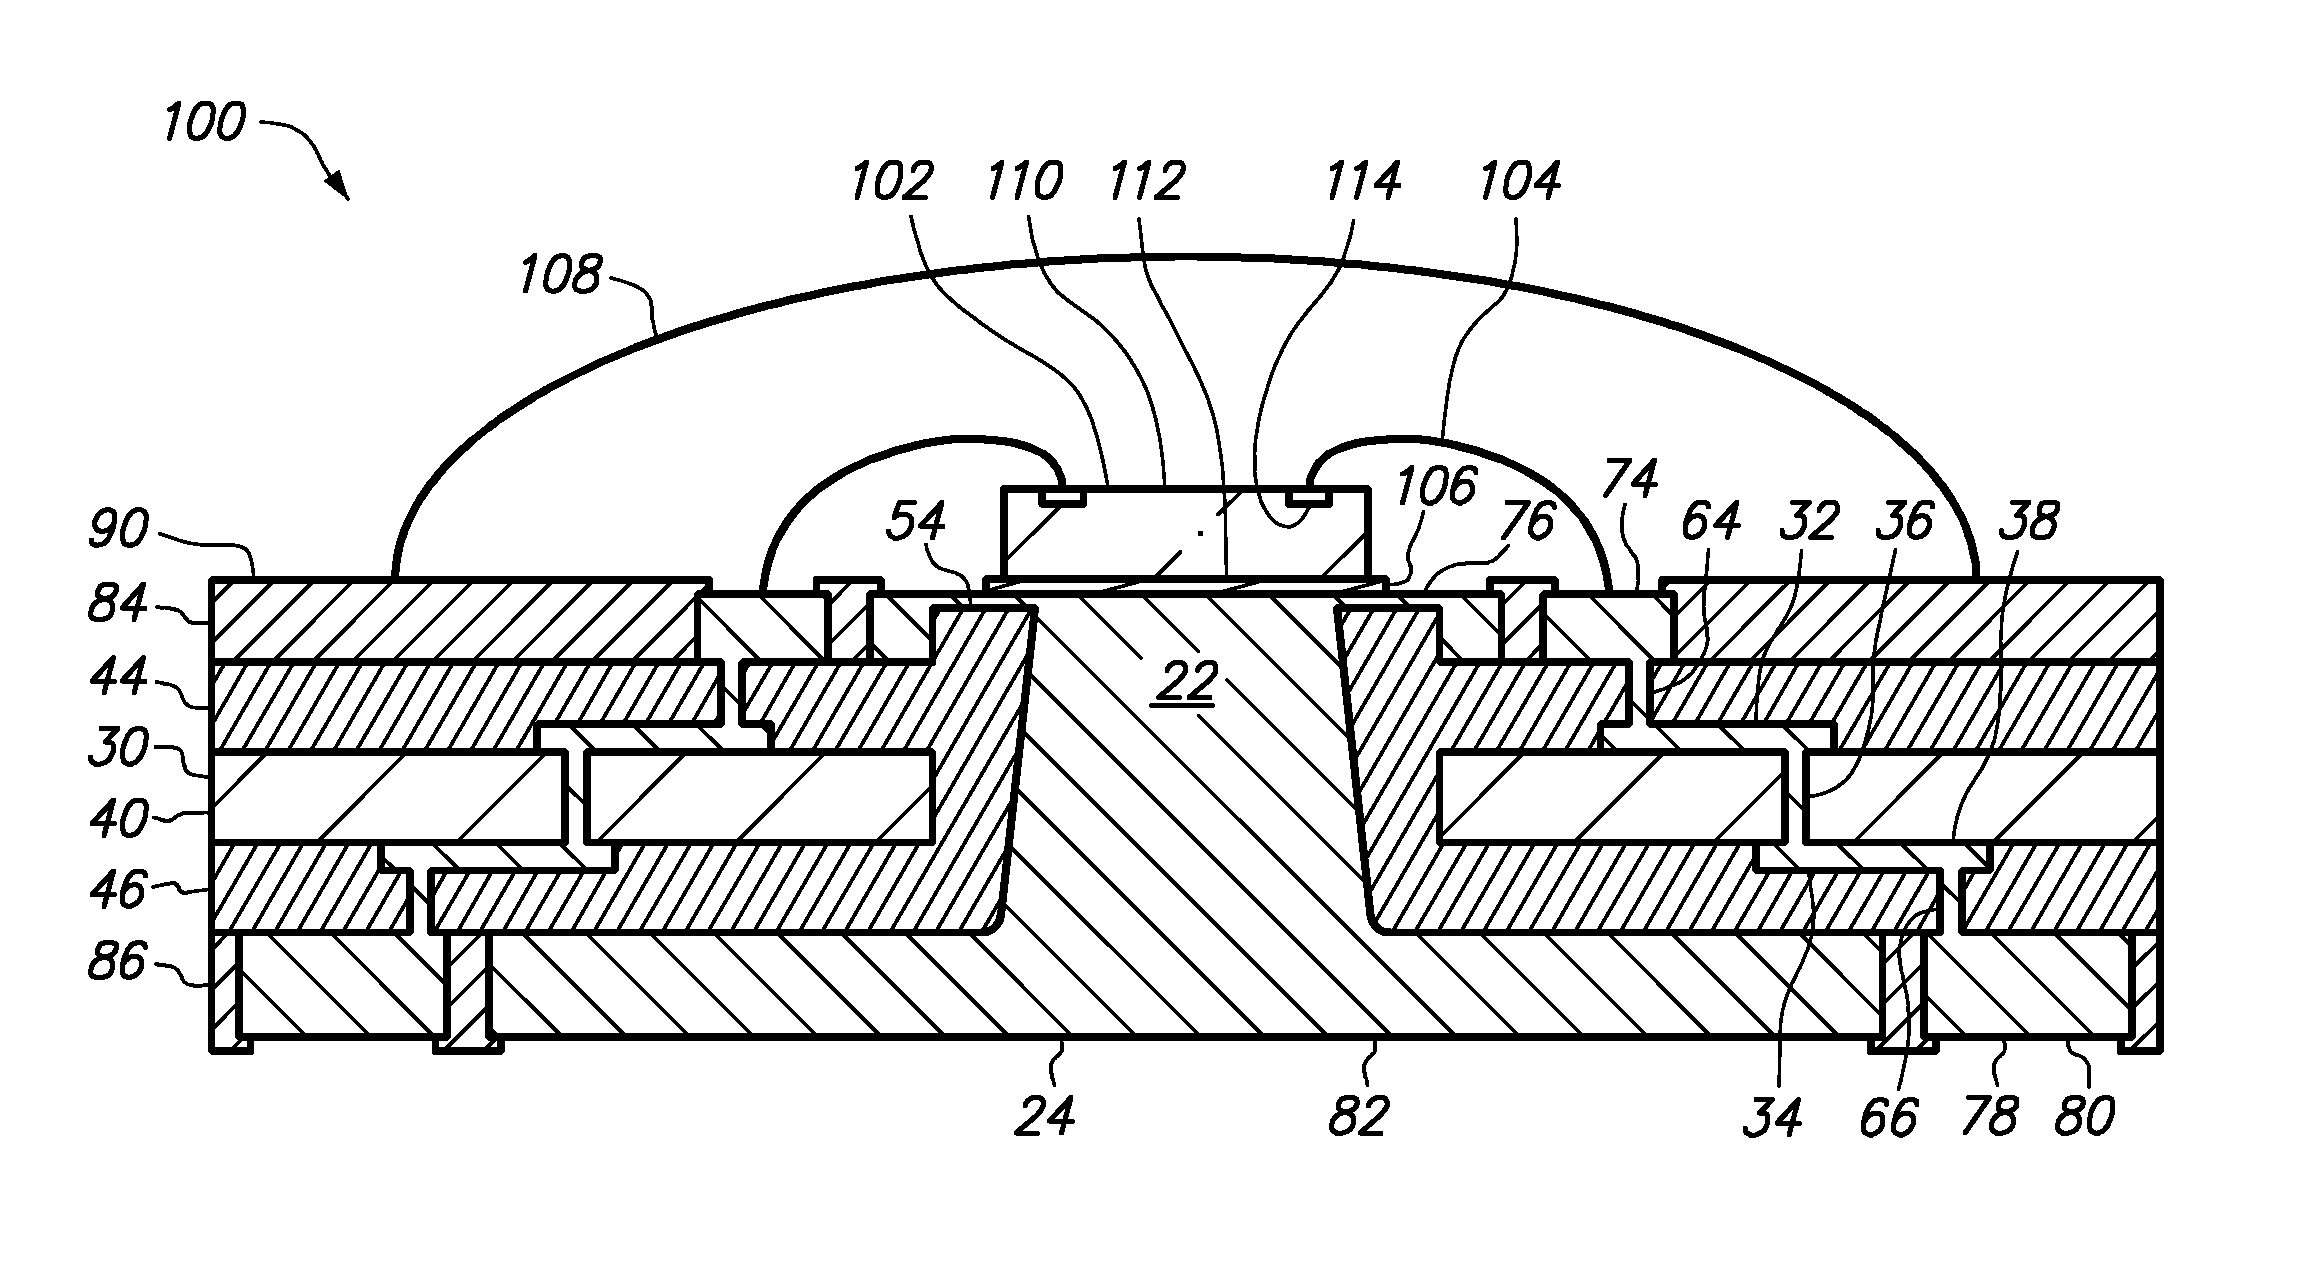 Method of making a semiconductor chip assembly with a post/base heat spreader and a mulitlevel conductive trace